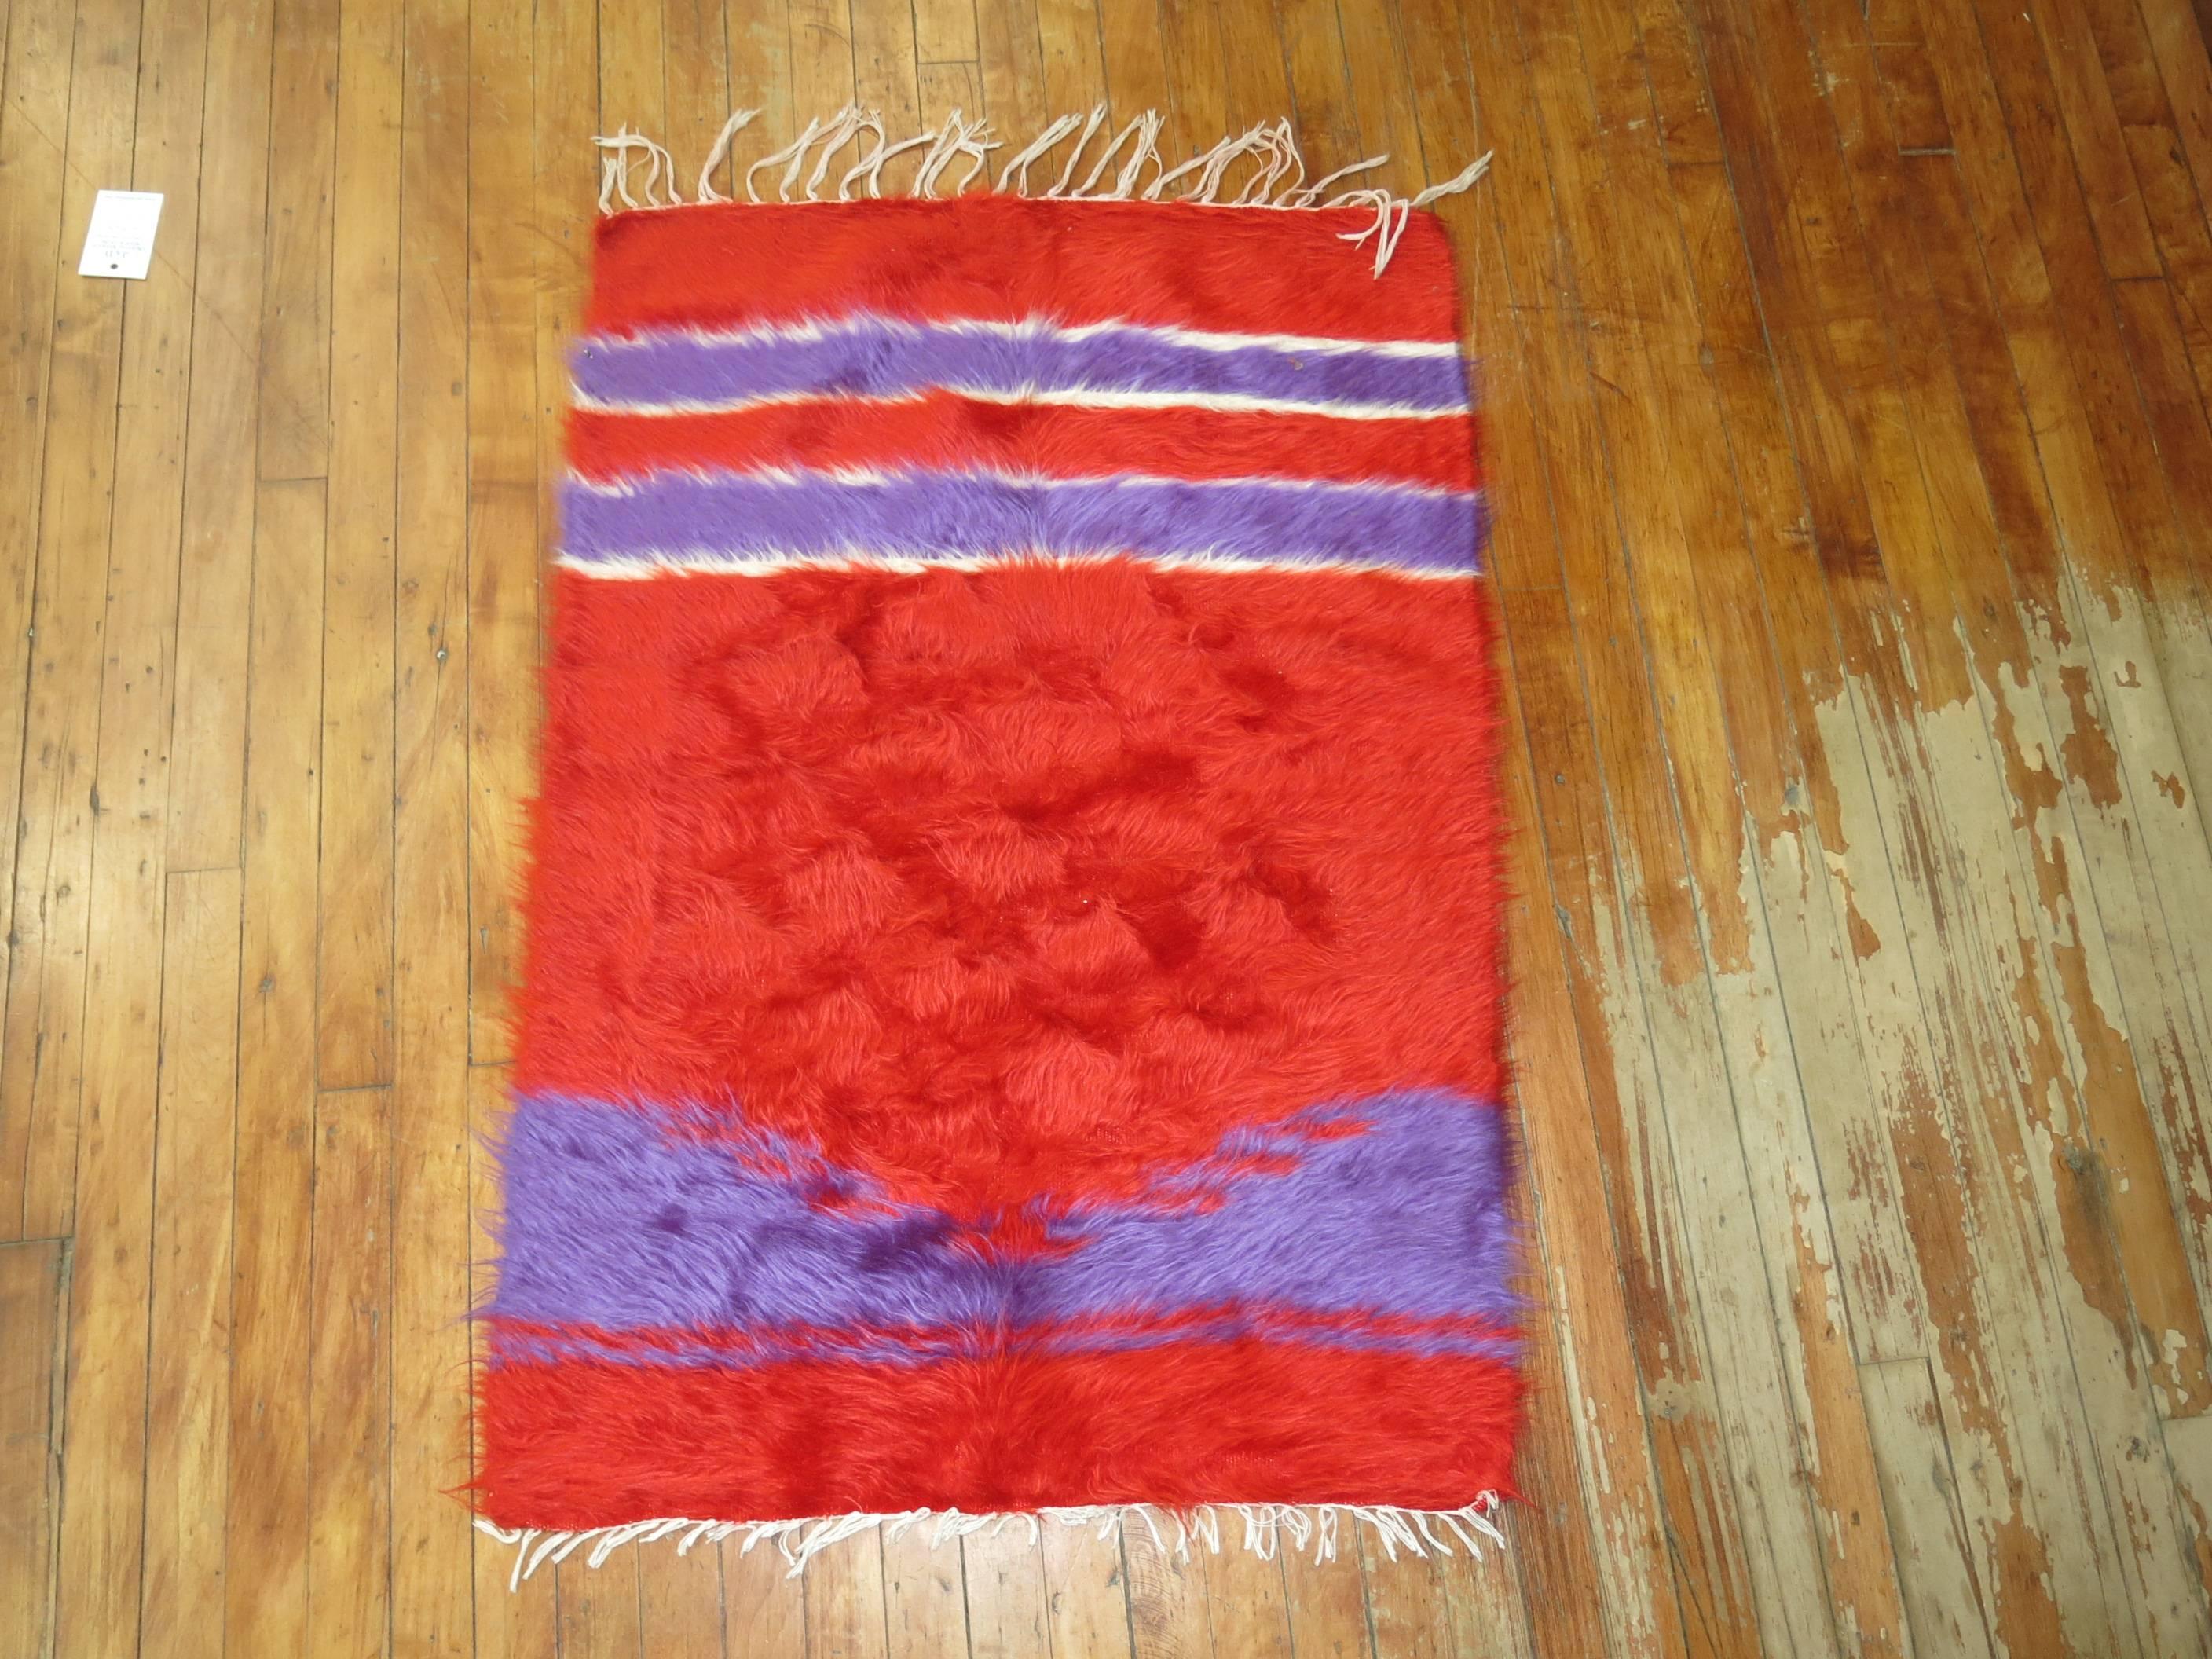 Rare color handwoven mohair wool rug in bright reds and purple.

Measures: 2'6